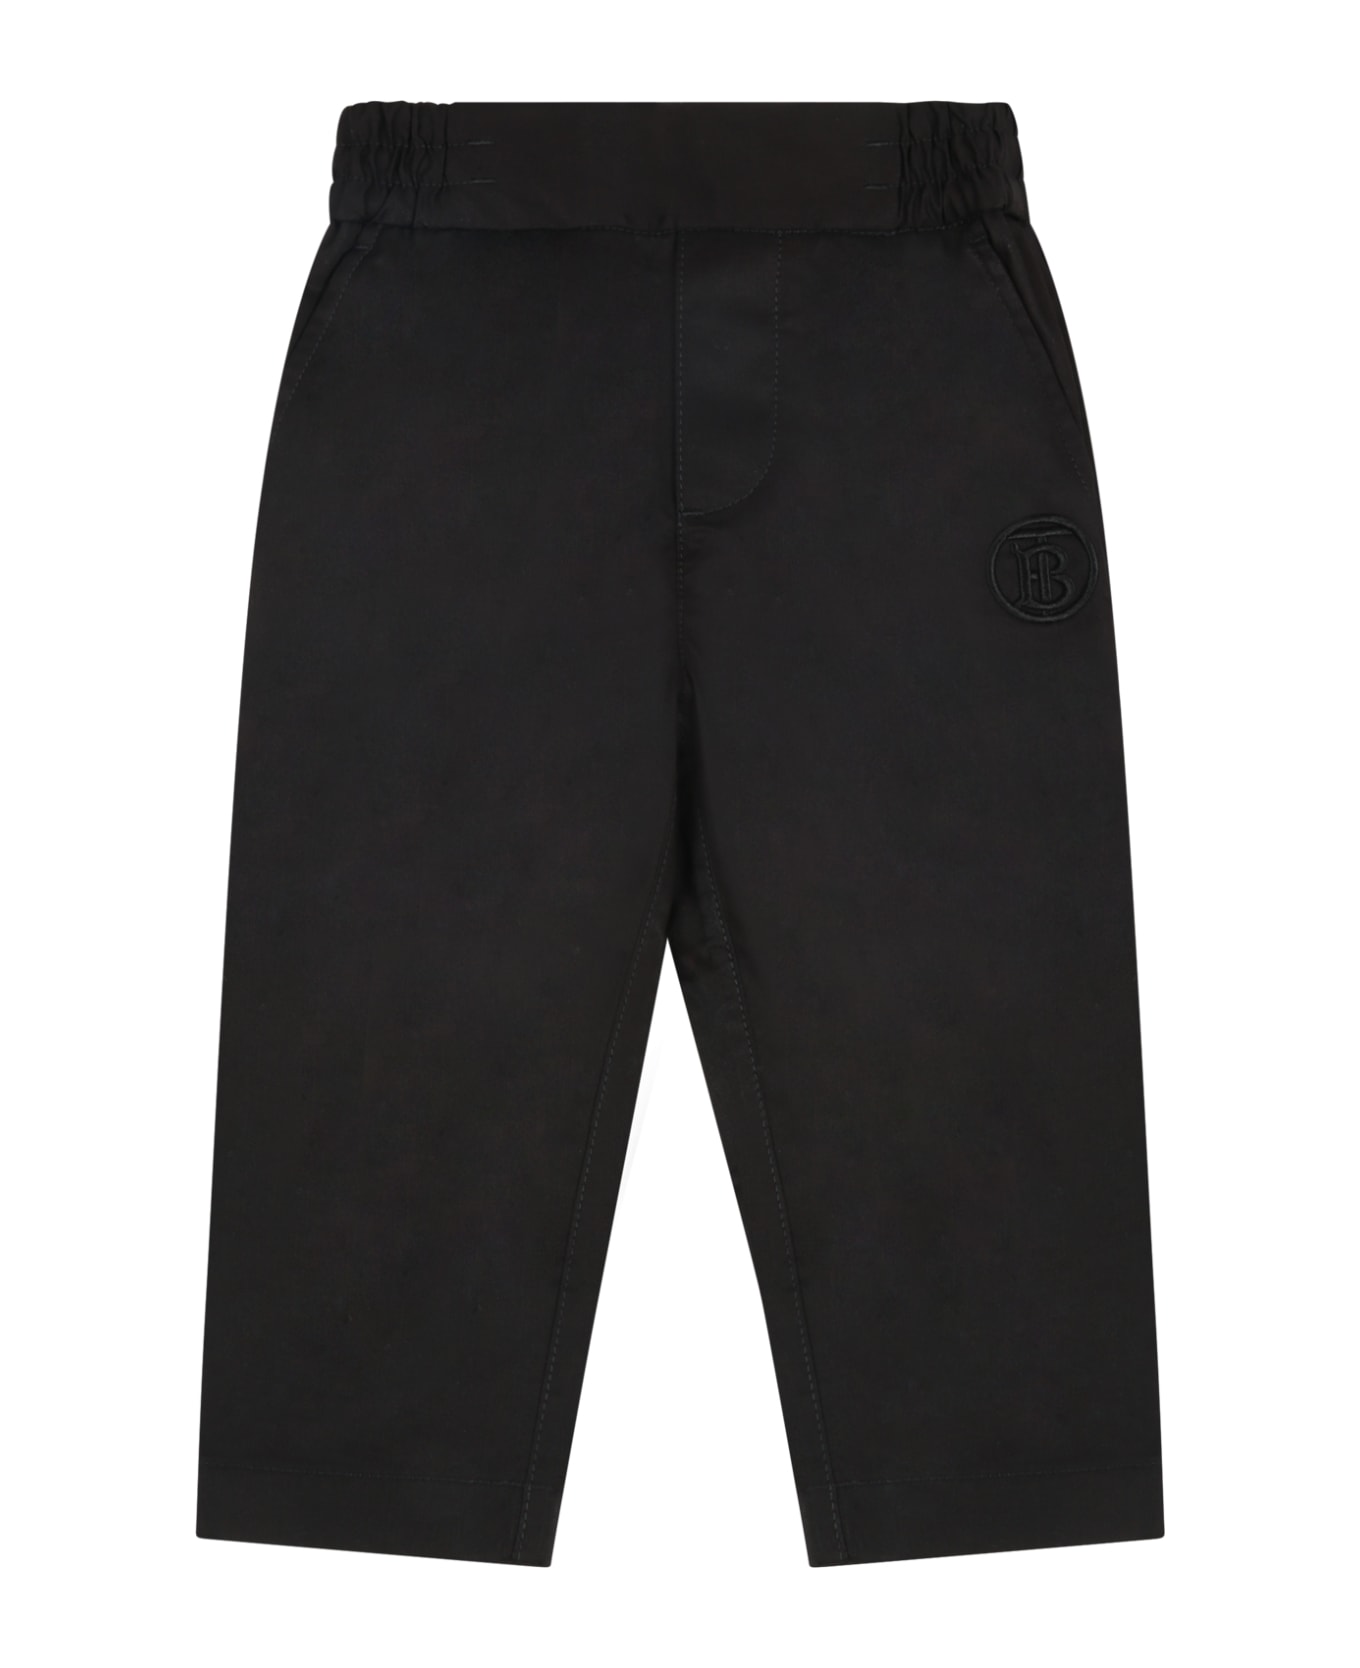 Burberry Black Trouser For Baby Boy With Logos - Black